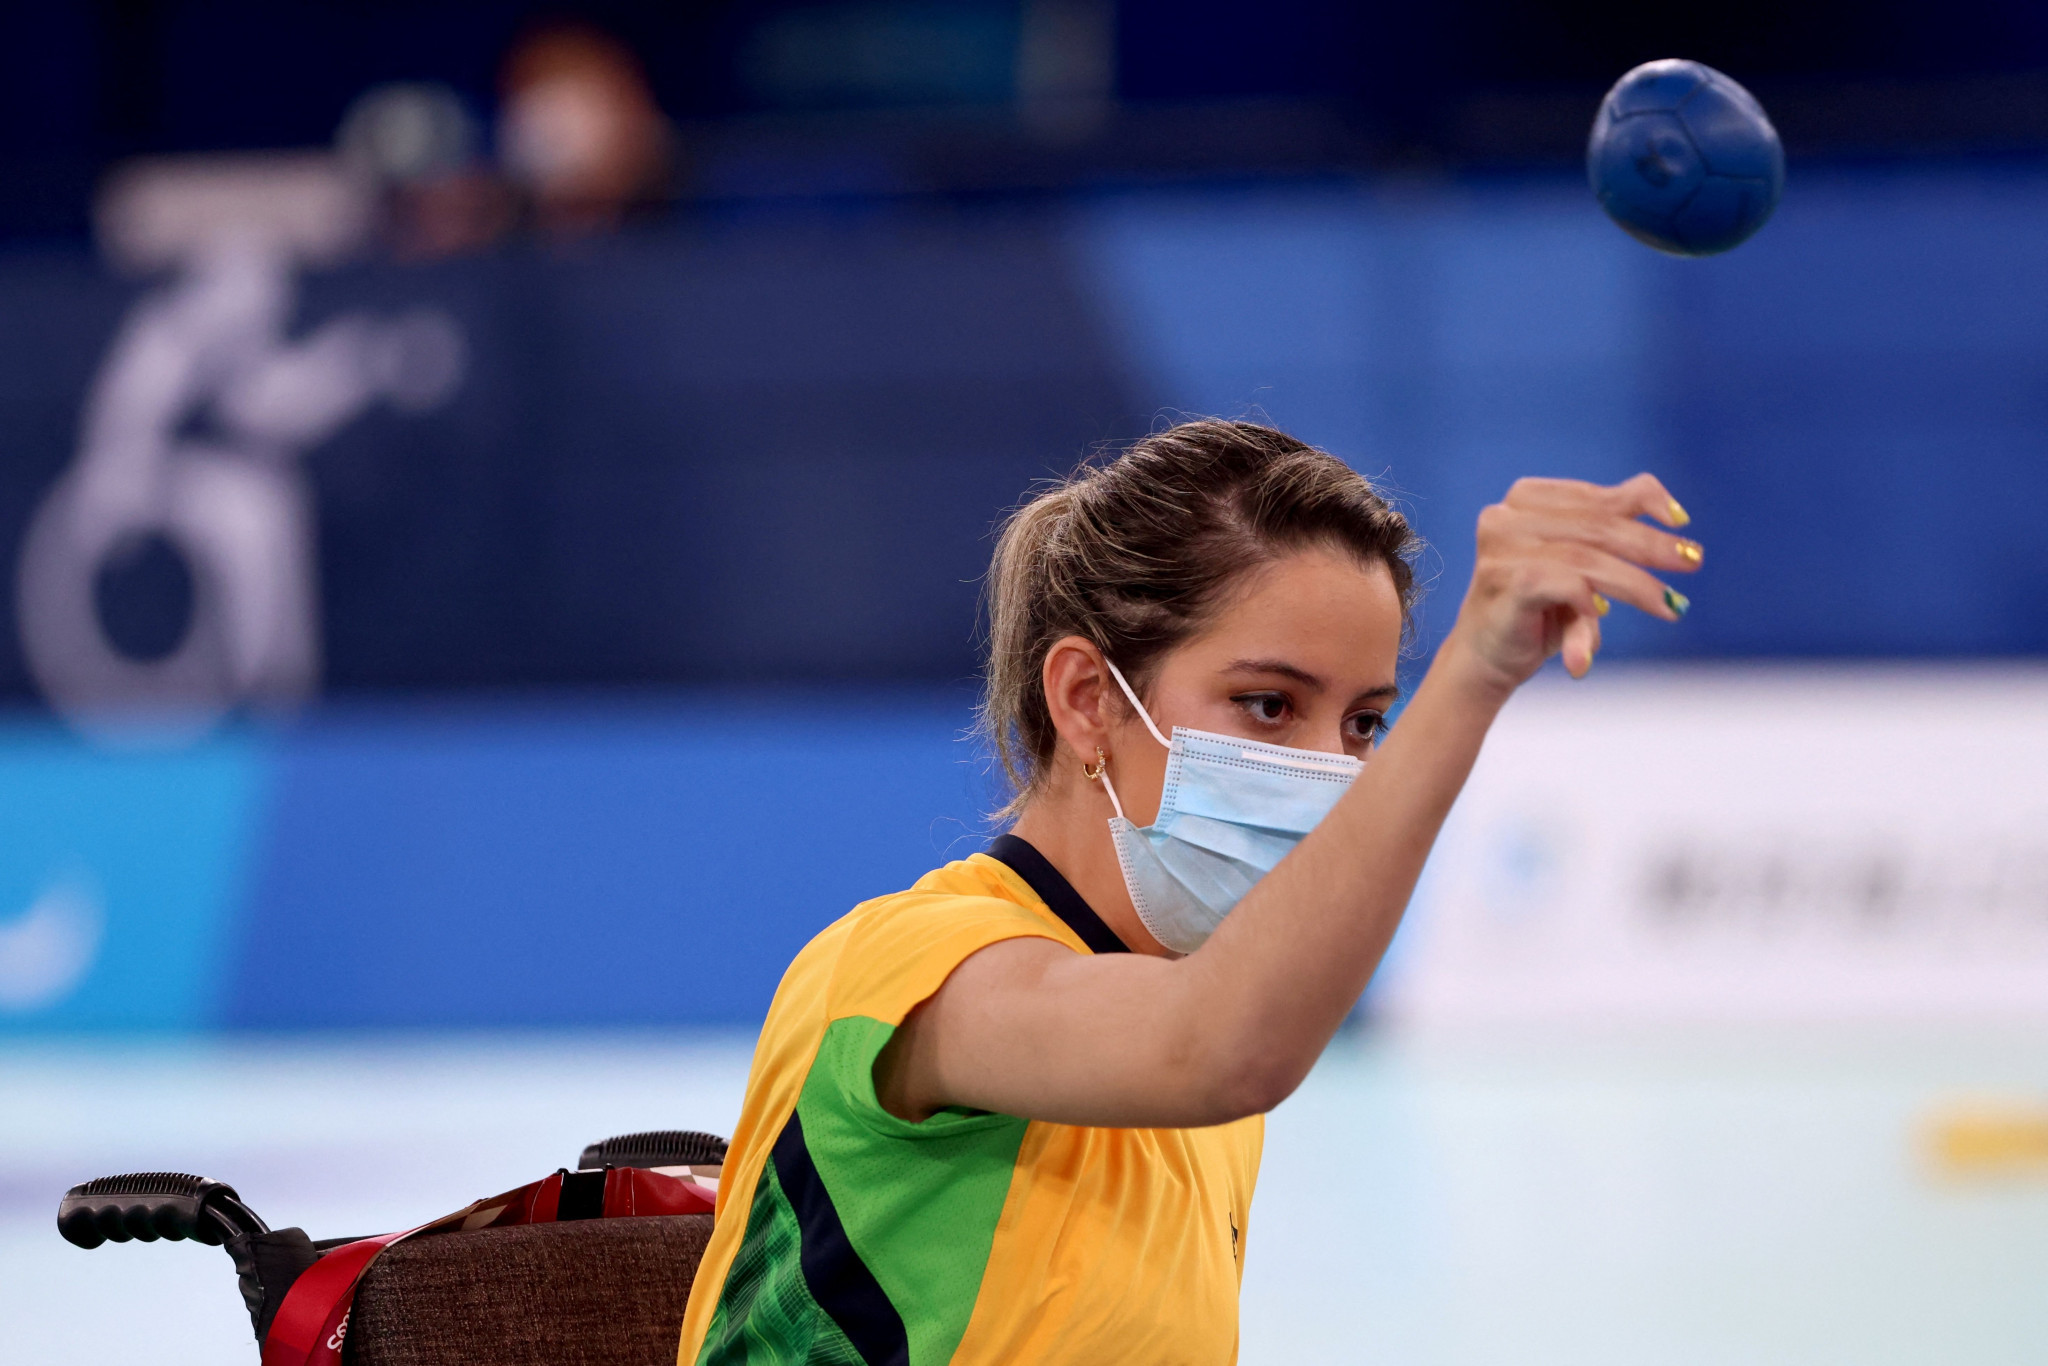 Andreza Vitoria De Oliveira ensured home success for Brazil at the Boccia World Championships in Rio de Janeiro, winning the women's BC1 category ©Getty Images